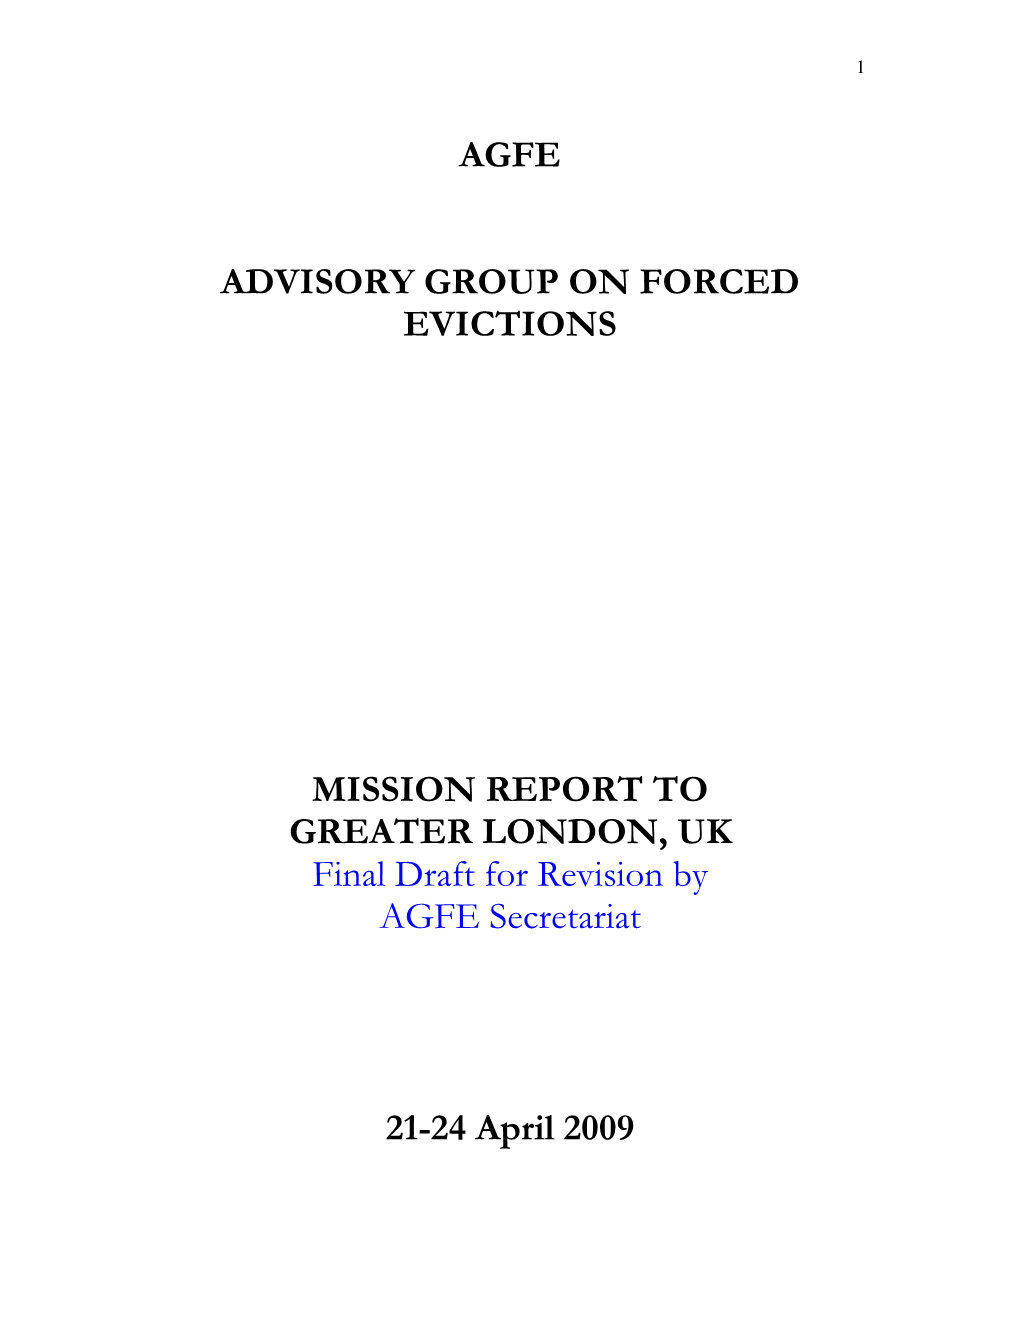 Agfe Advisory Group on Forced Evictions Mission